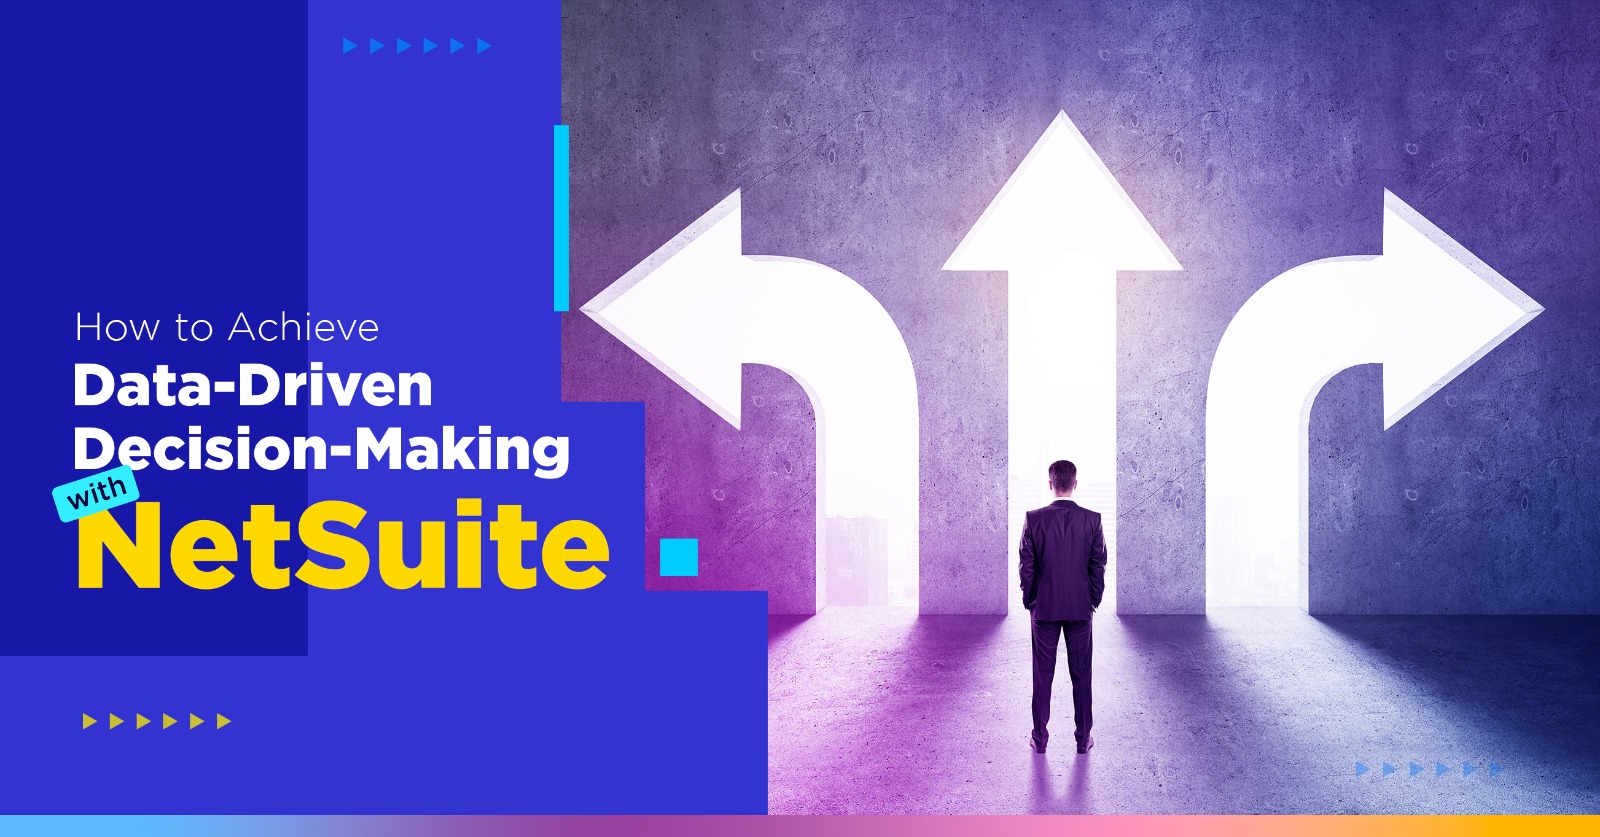 How to Achieve Data-Driven Decision-Making with NetSuite